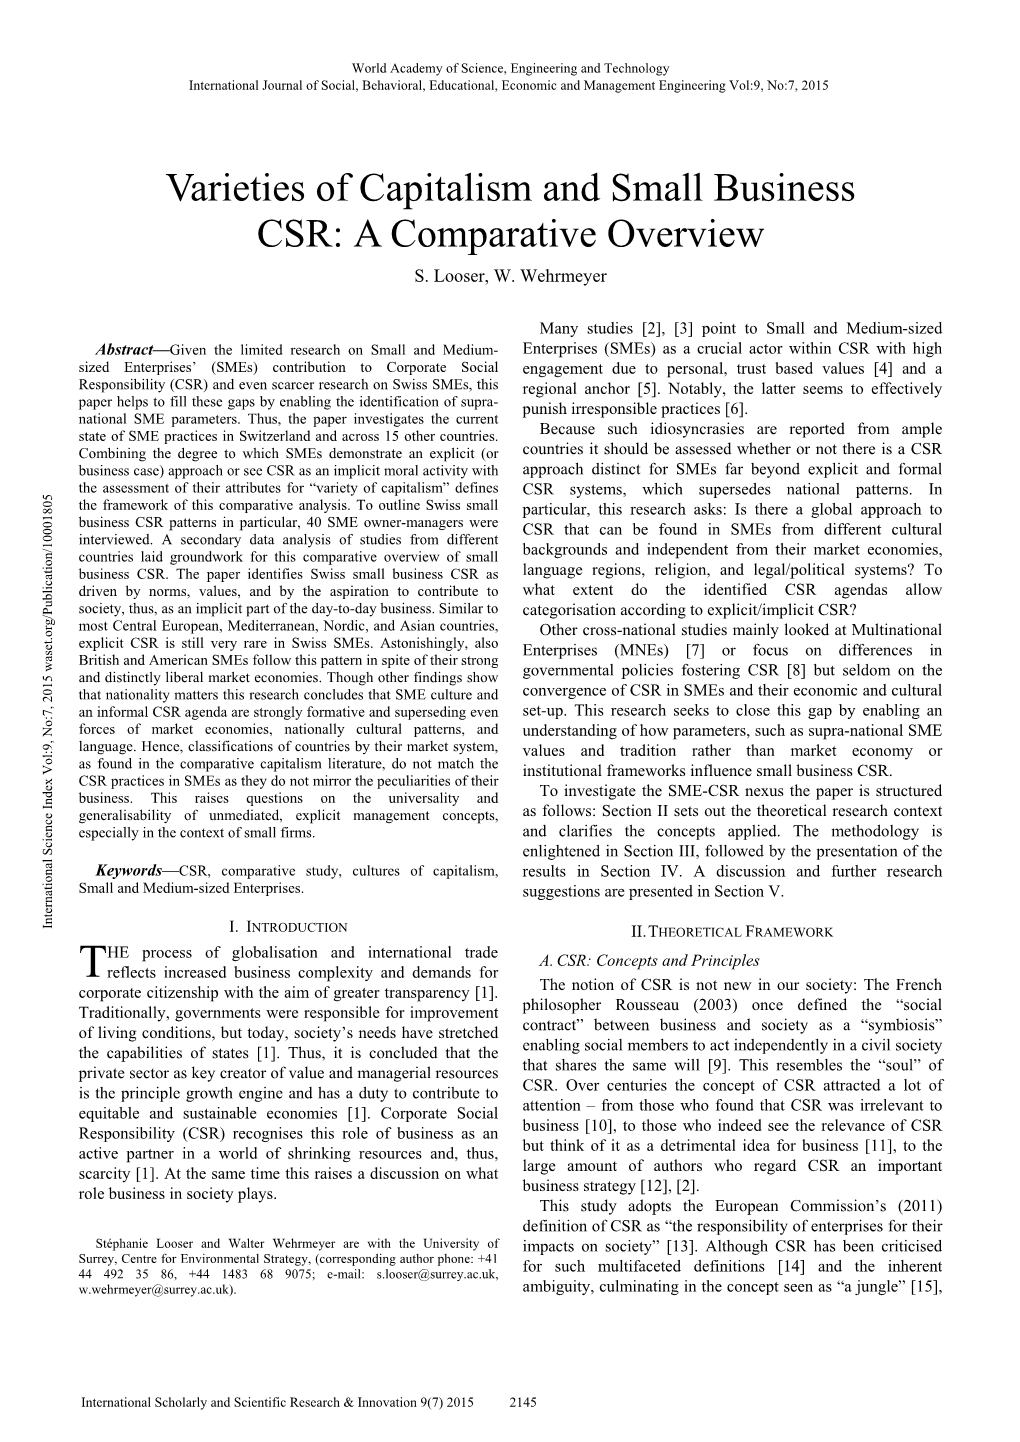 Varieties of Capitalism and Small Business CSR: a Comparative Overview S